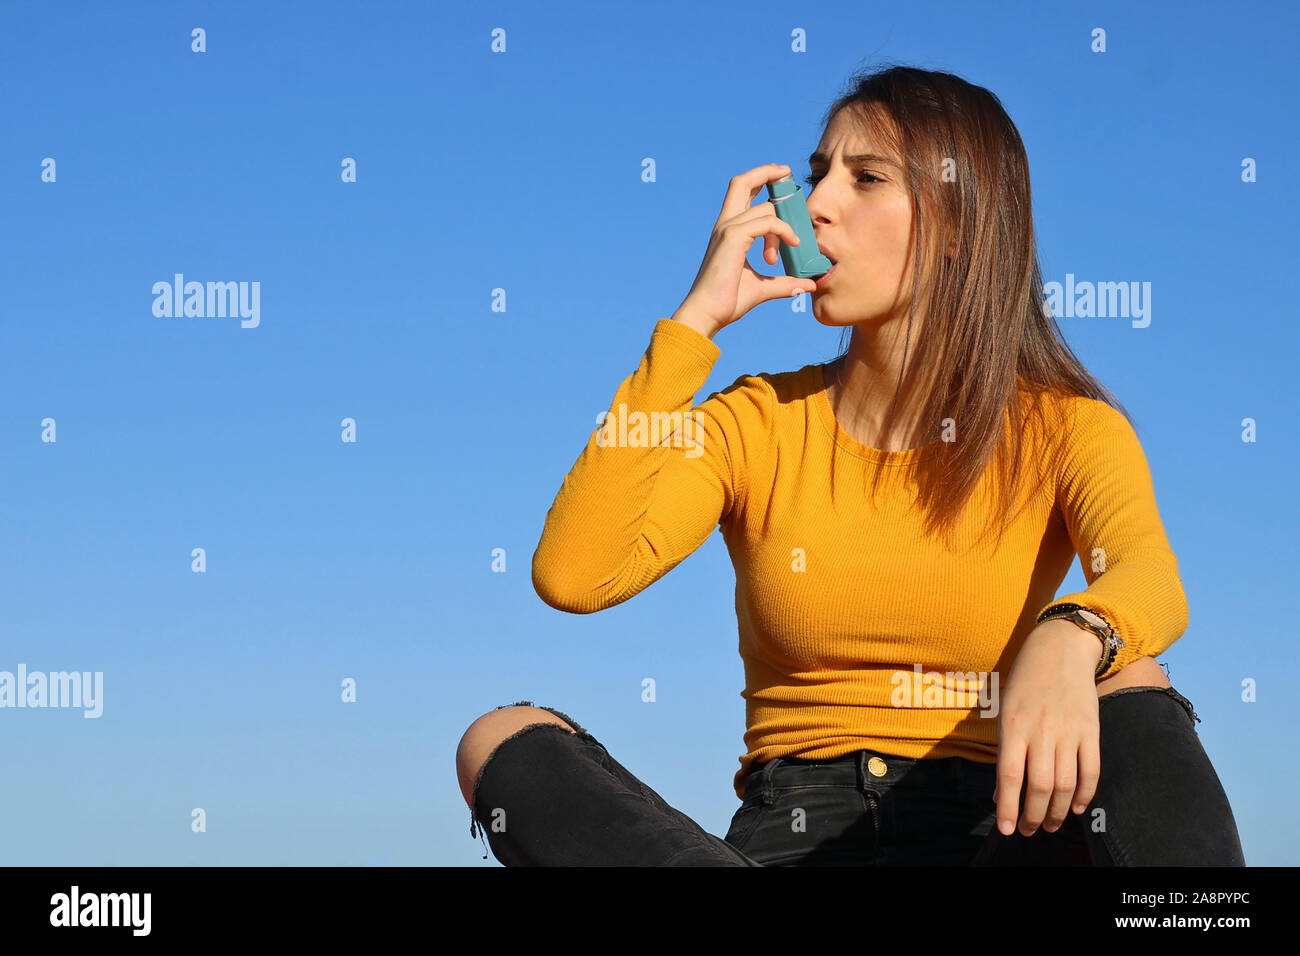 Beautiful young girl dressed in yellow taking the asthma inhaler on a blue background. Pharmaceutical product to prevent an asthma attack. Stock Photo